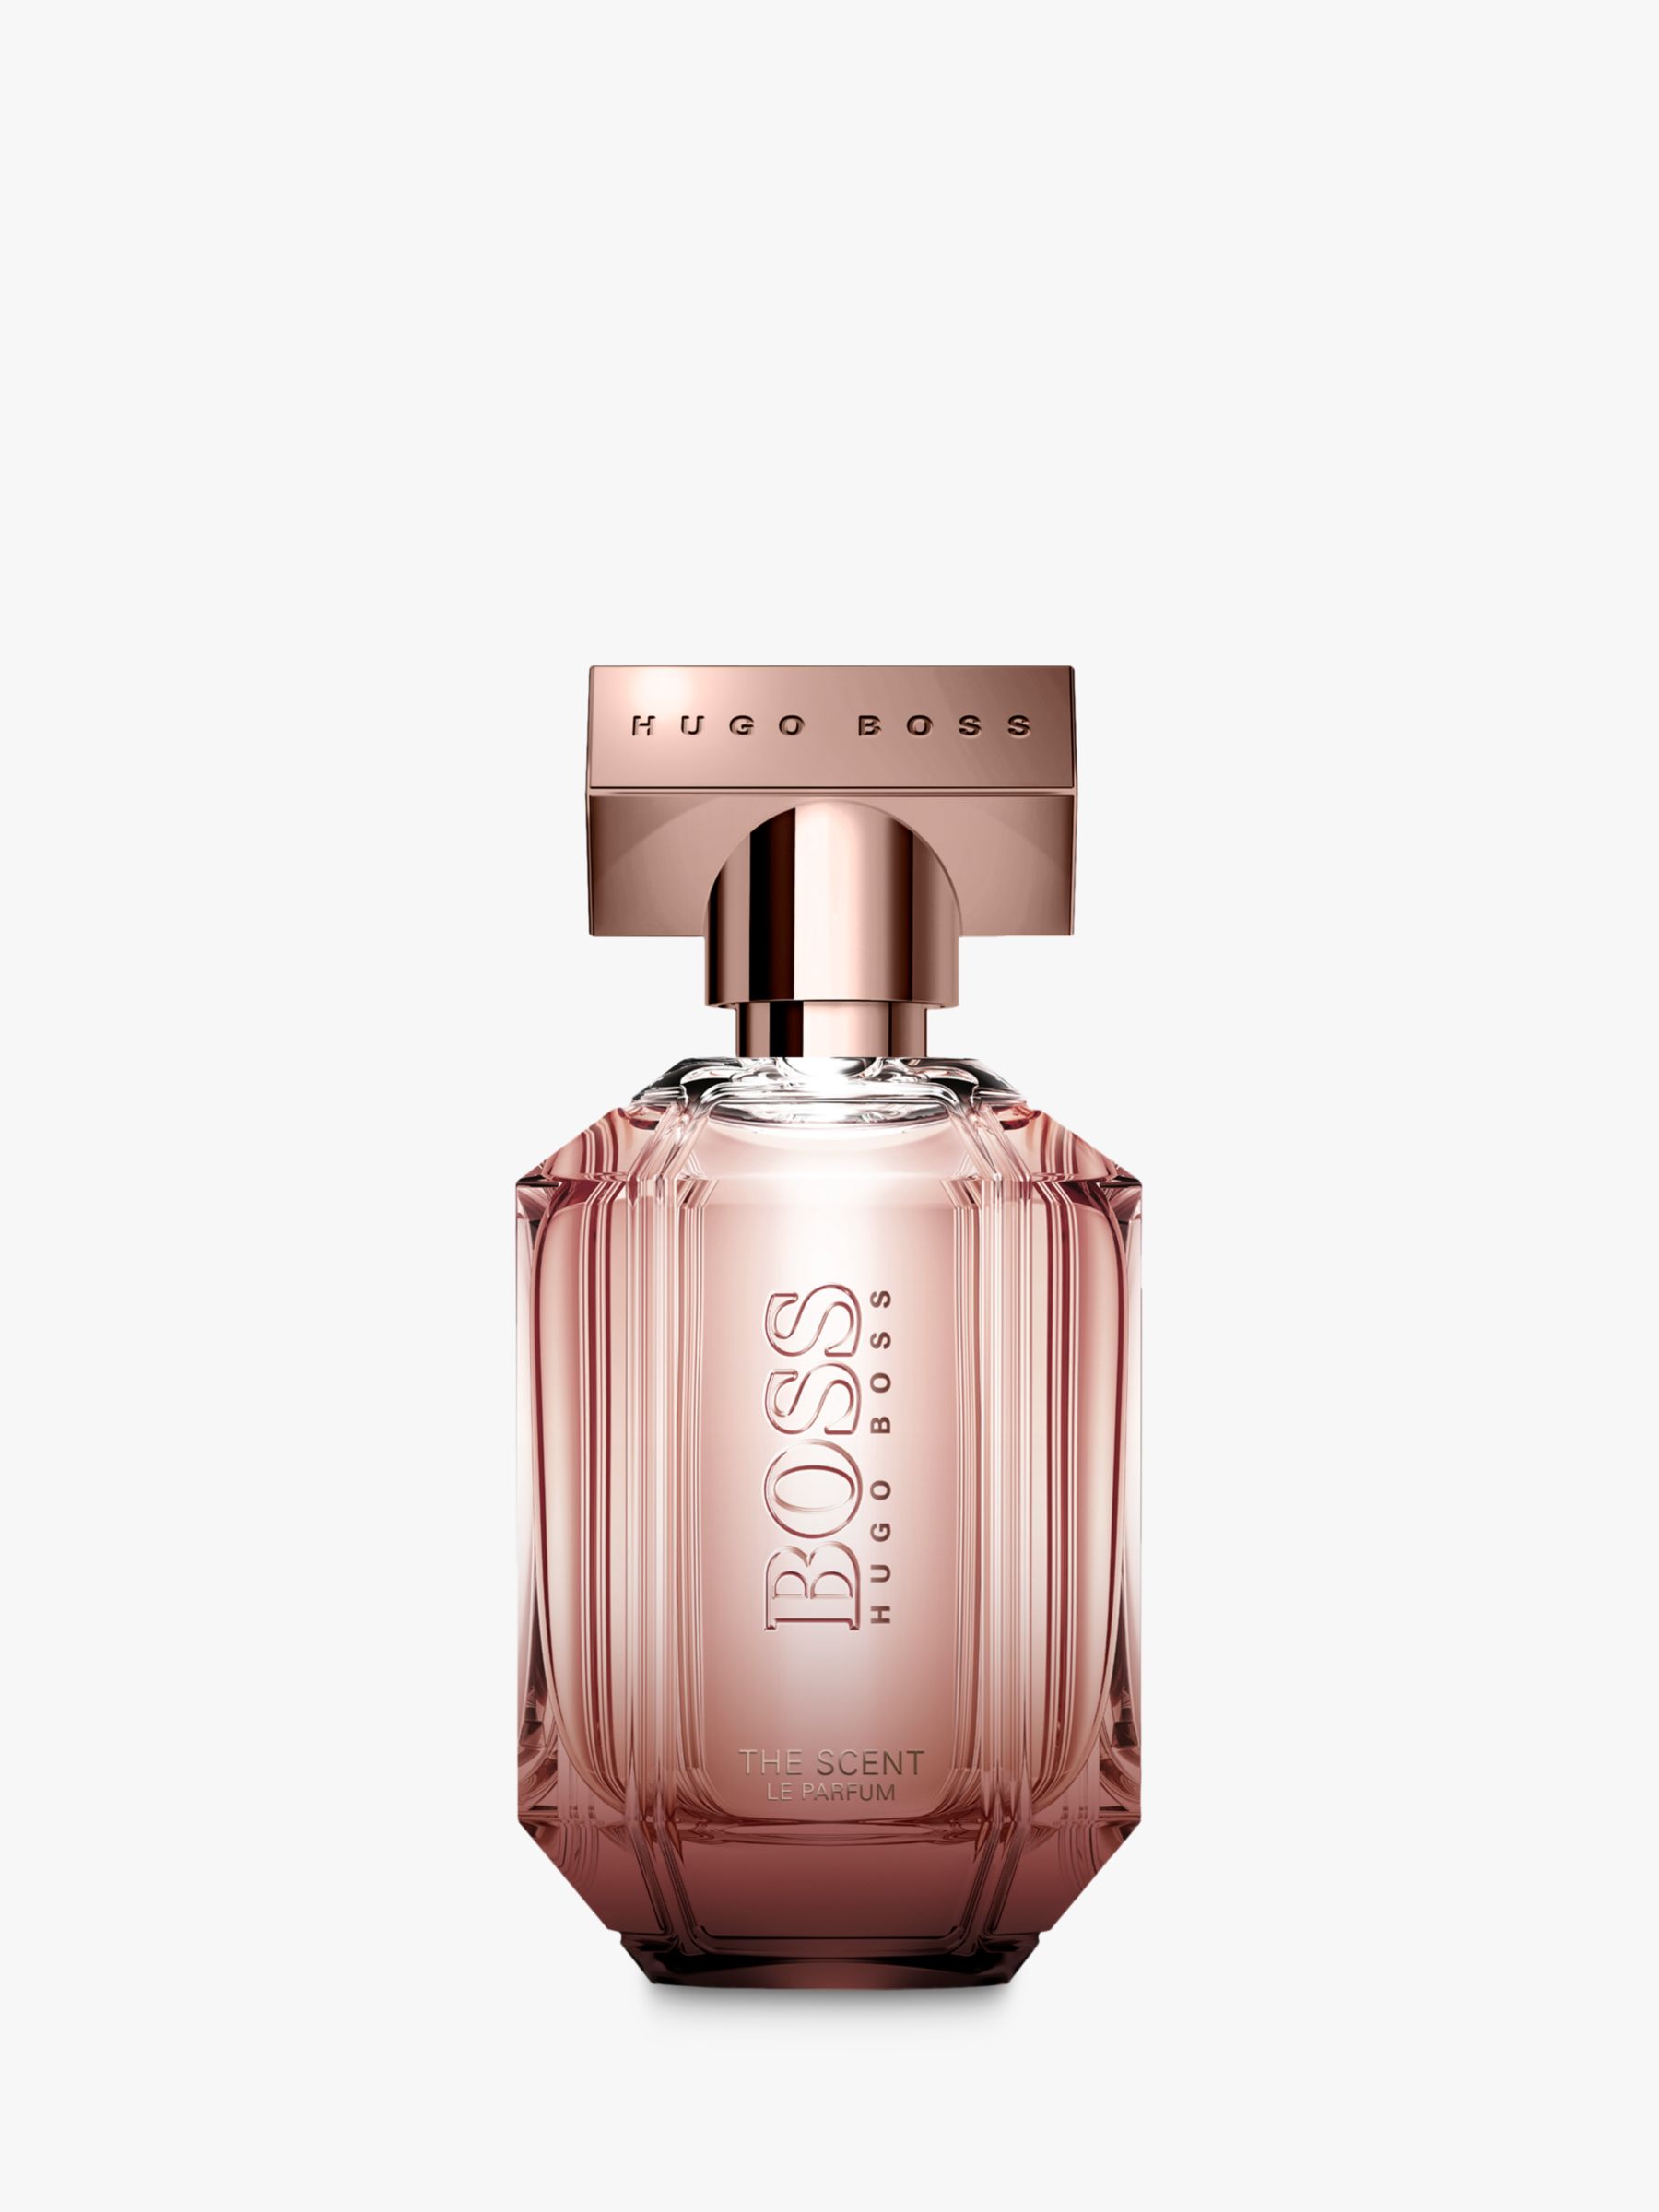 HUGO BOSS The Scent Le Parfum for Her, 50ml at John Lewis & Partners